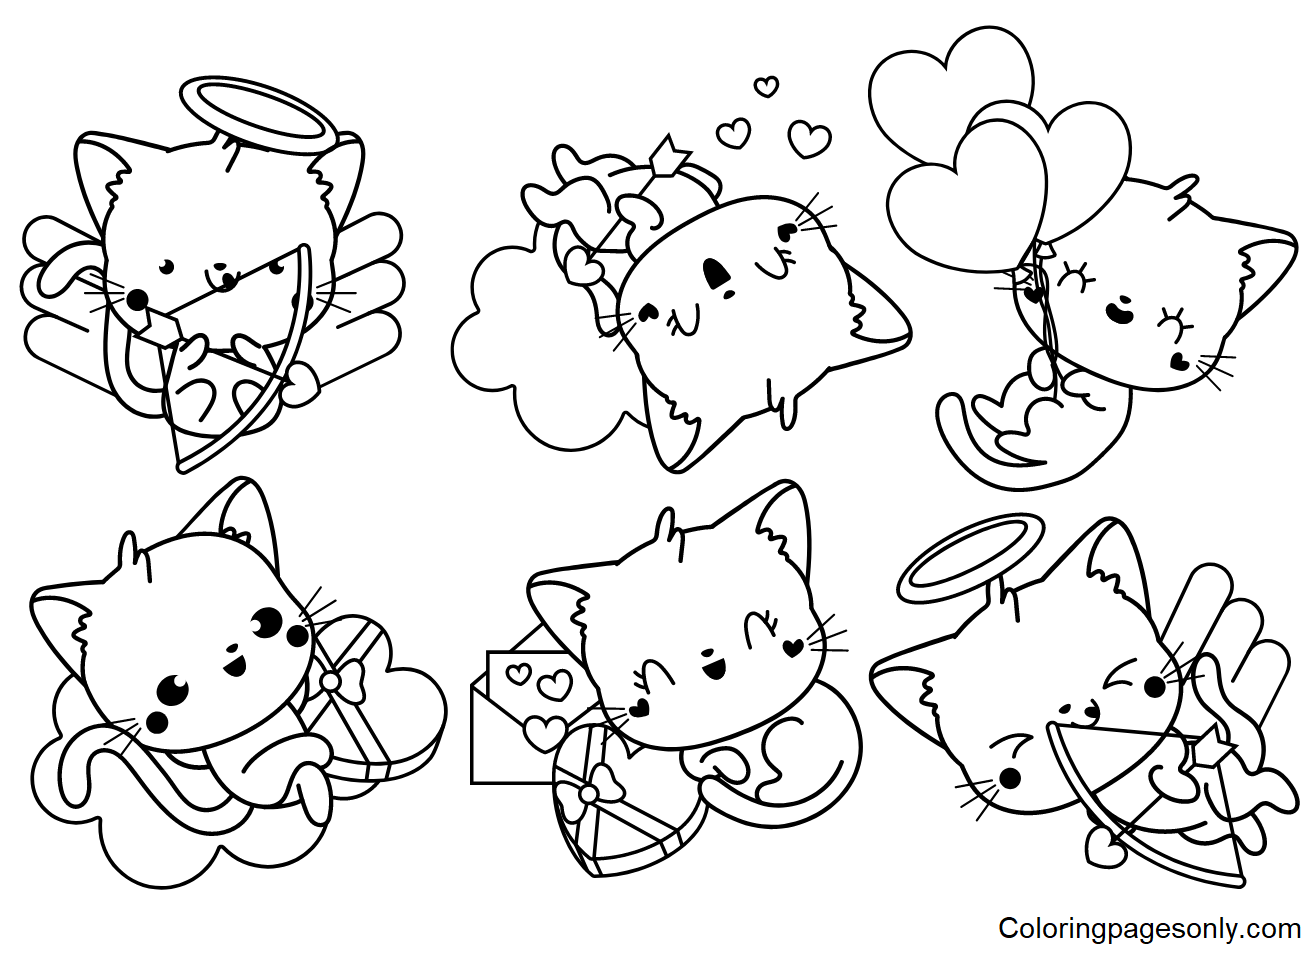 Kawaii Cat Sticker Coloring Pages